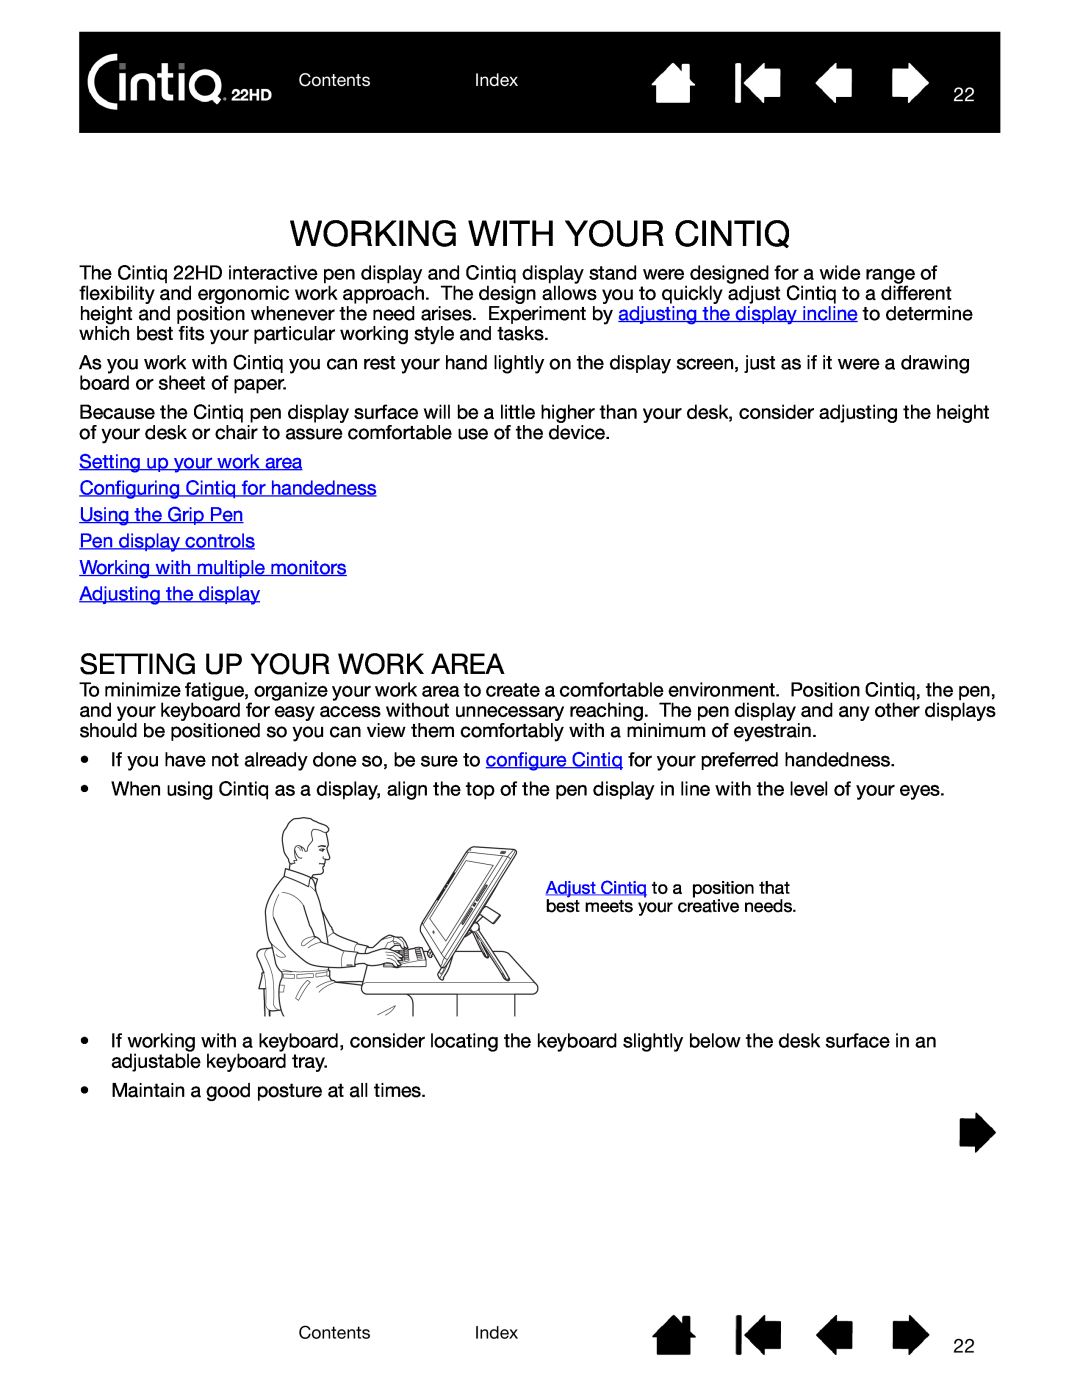 Wacom DTK-2200 user manual Working With Your Cintiq, Setting Up Your Work Area, Using the Grip Pen Pen display controls 